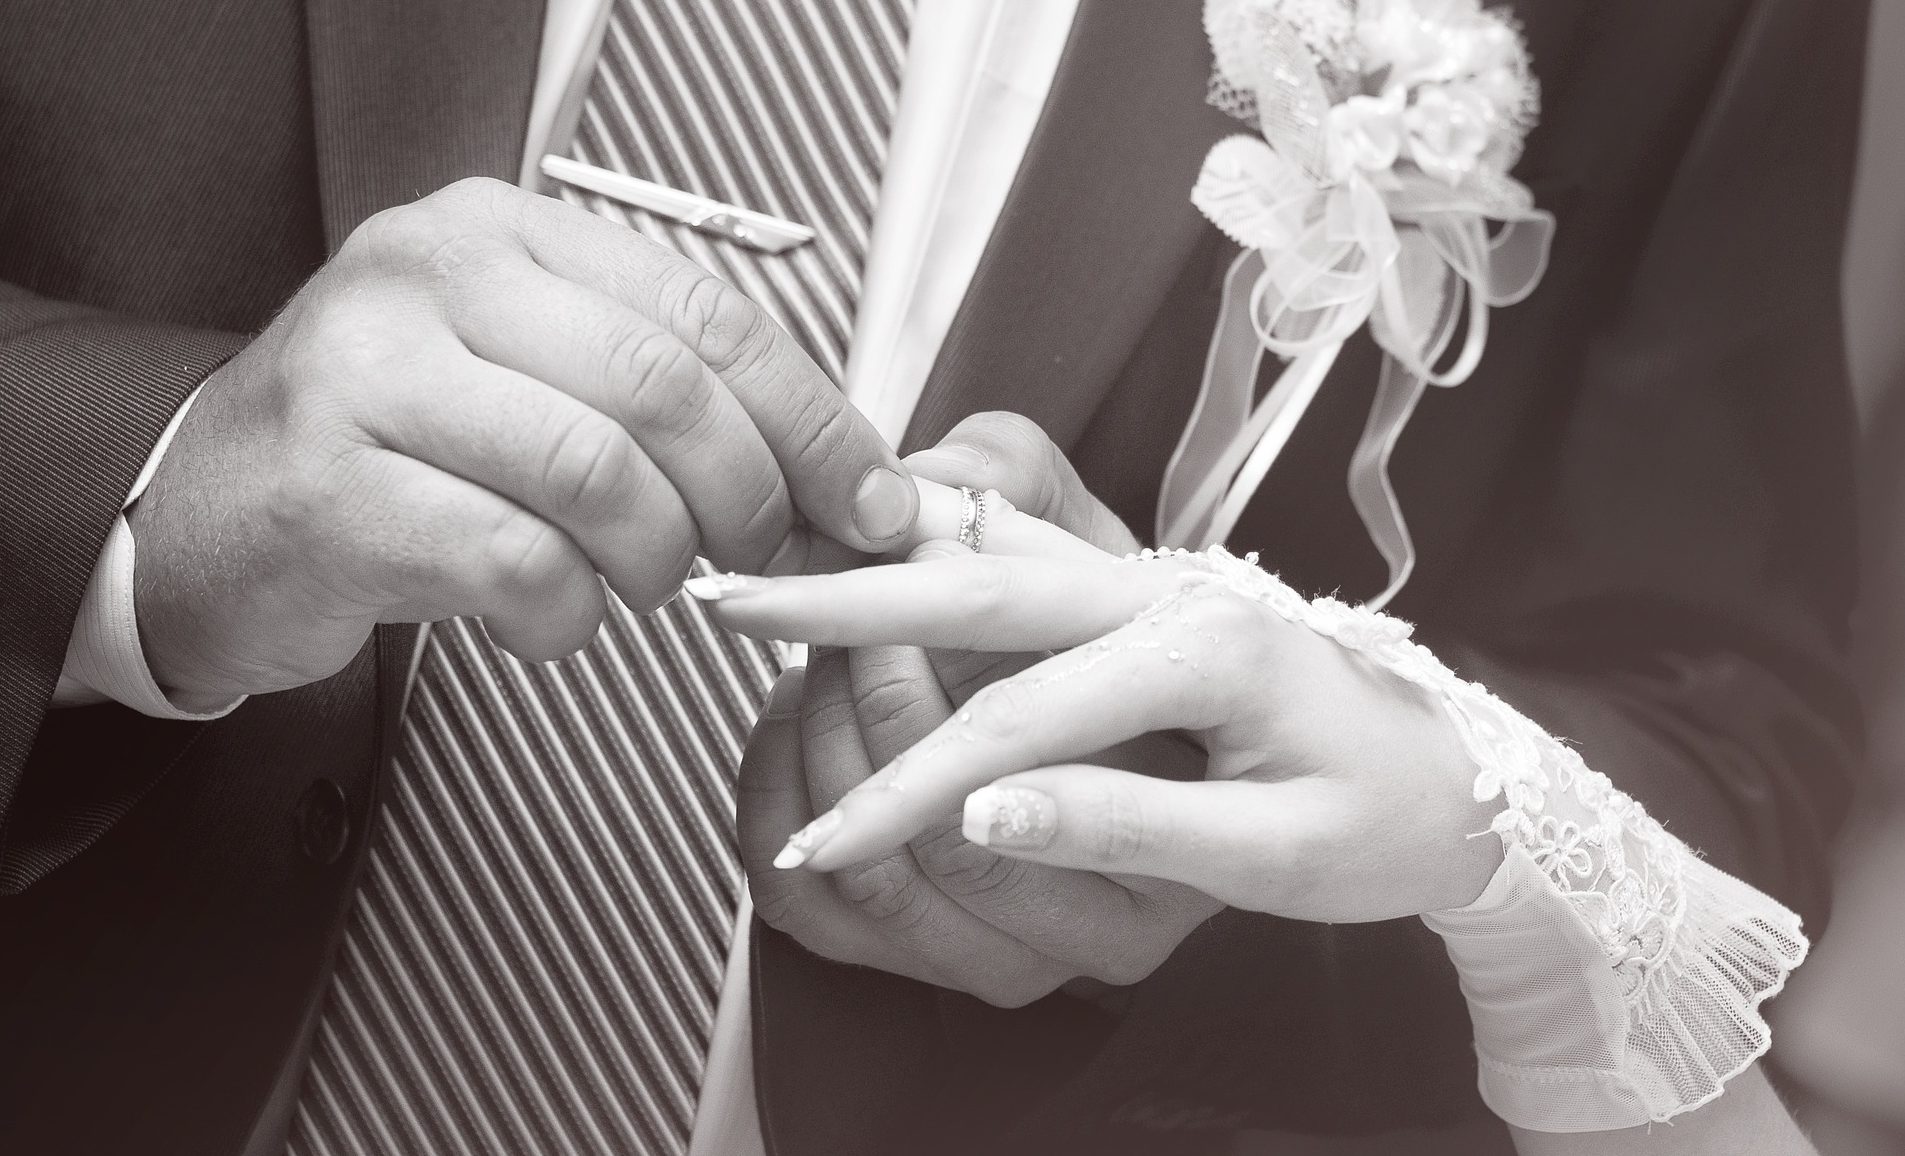 10 Top Tips For Picking The Perfect Wedding Ring